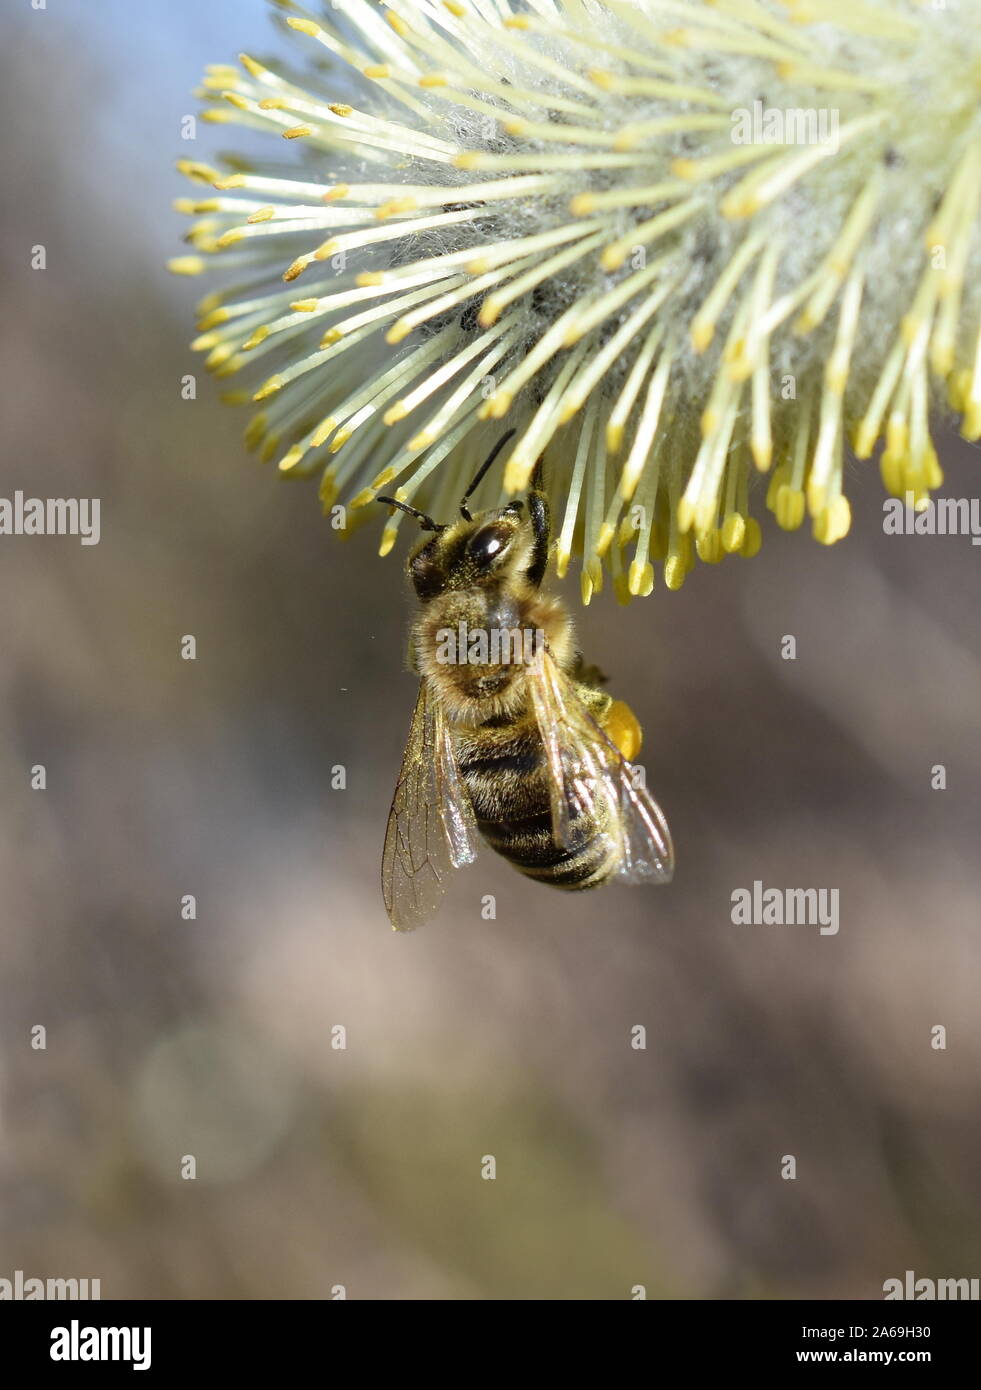 A honeybee Apis mellifera collecting pollen on a yellow willow catkin flower Stock Photo